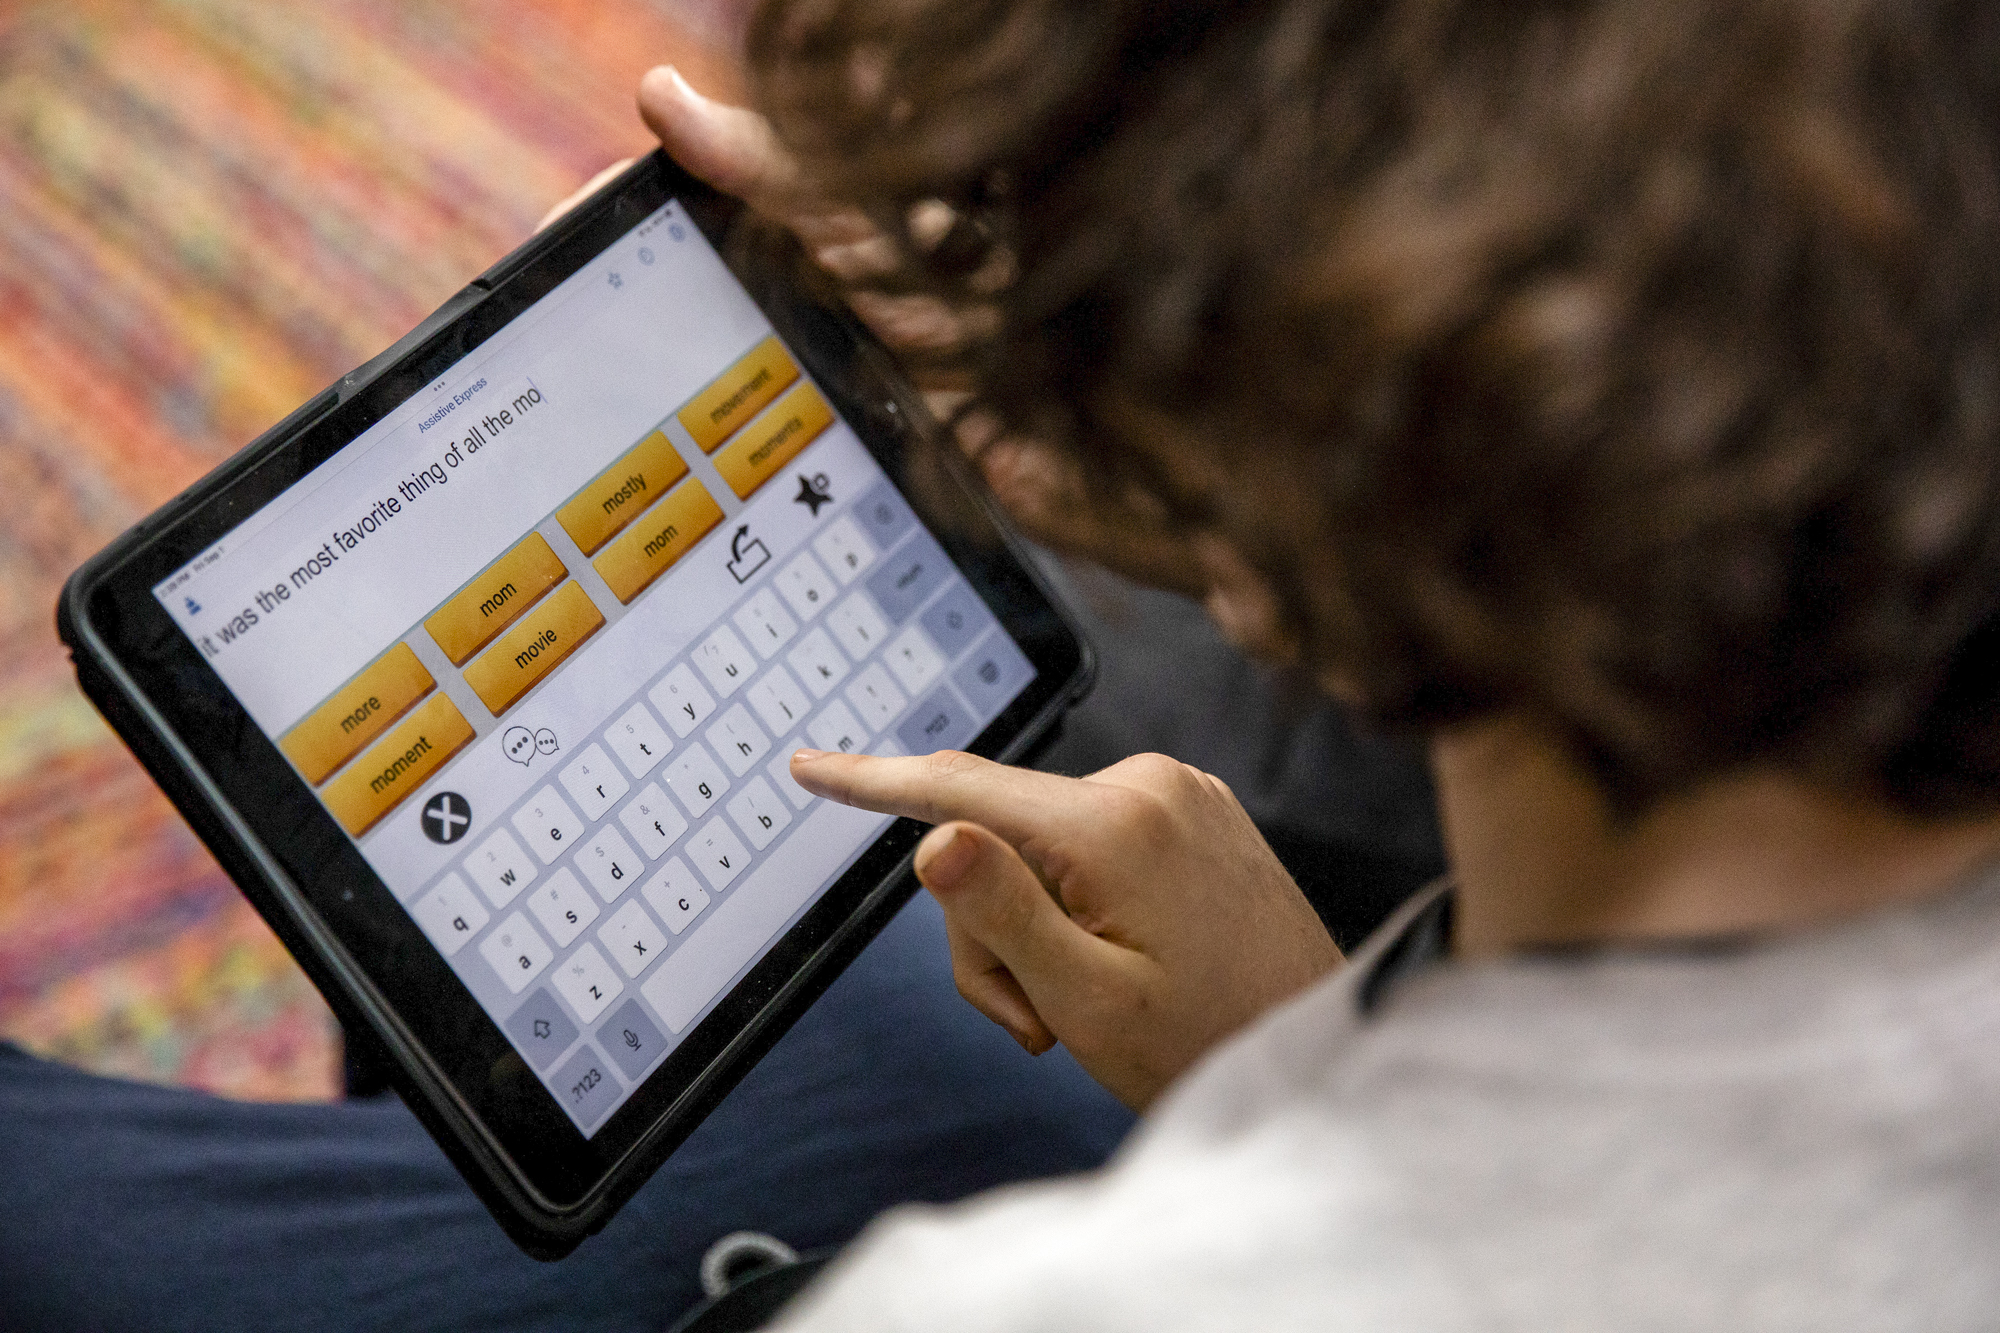 A person uses an ipad to type a sentence.